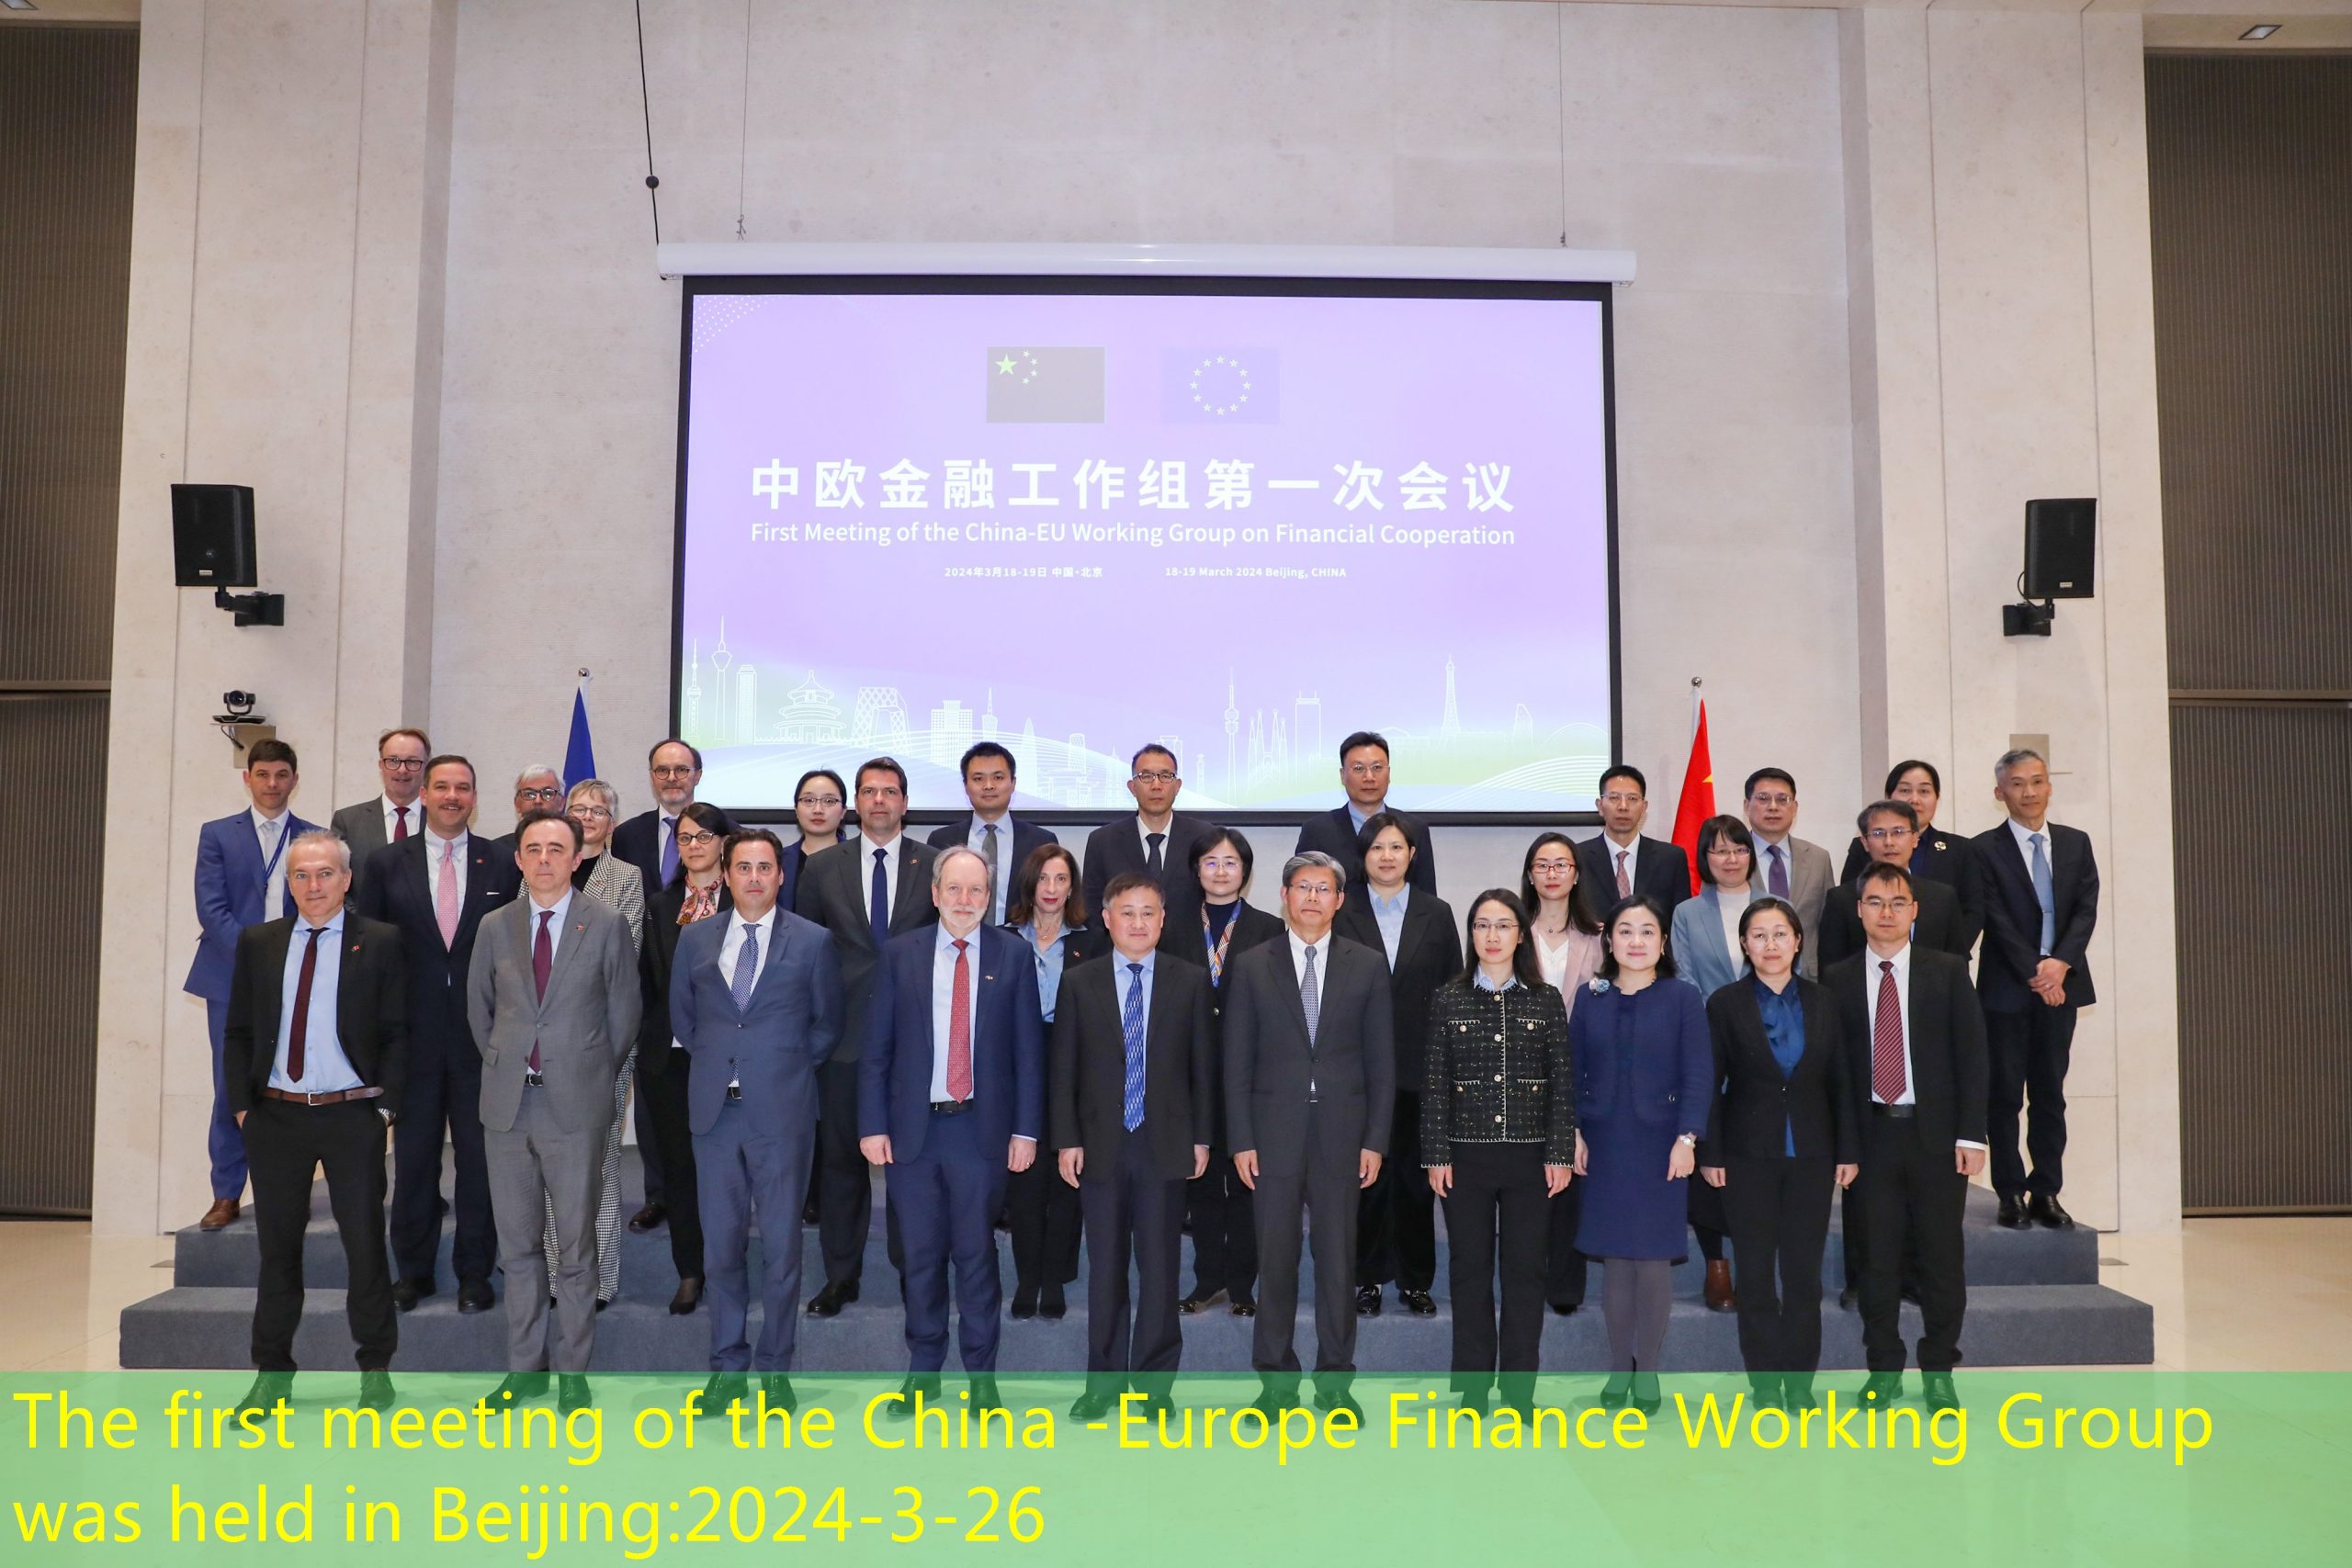 The first meeting of the China -Europe Finance Working Group was held in Beijing